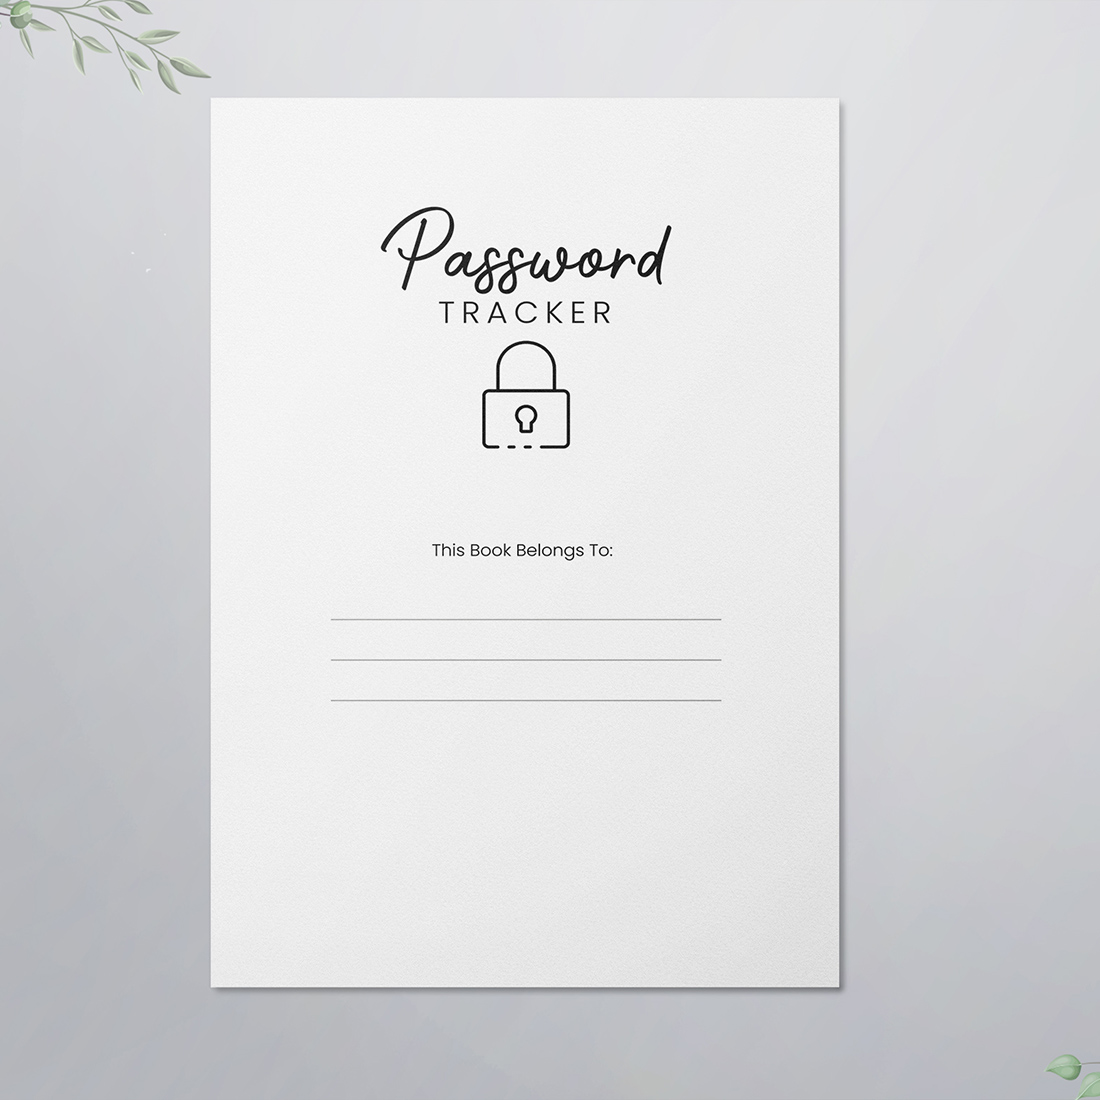 Password Tracker Logbook KDP Interior preview image.